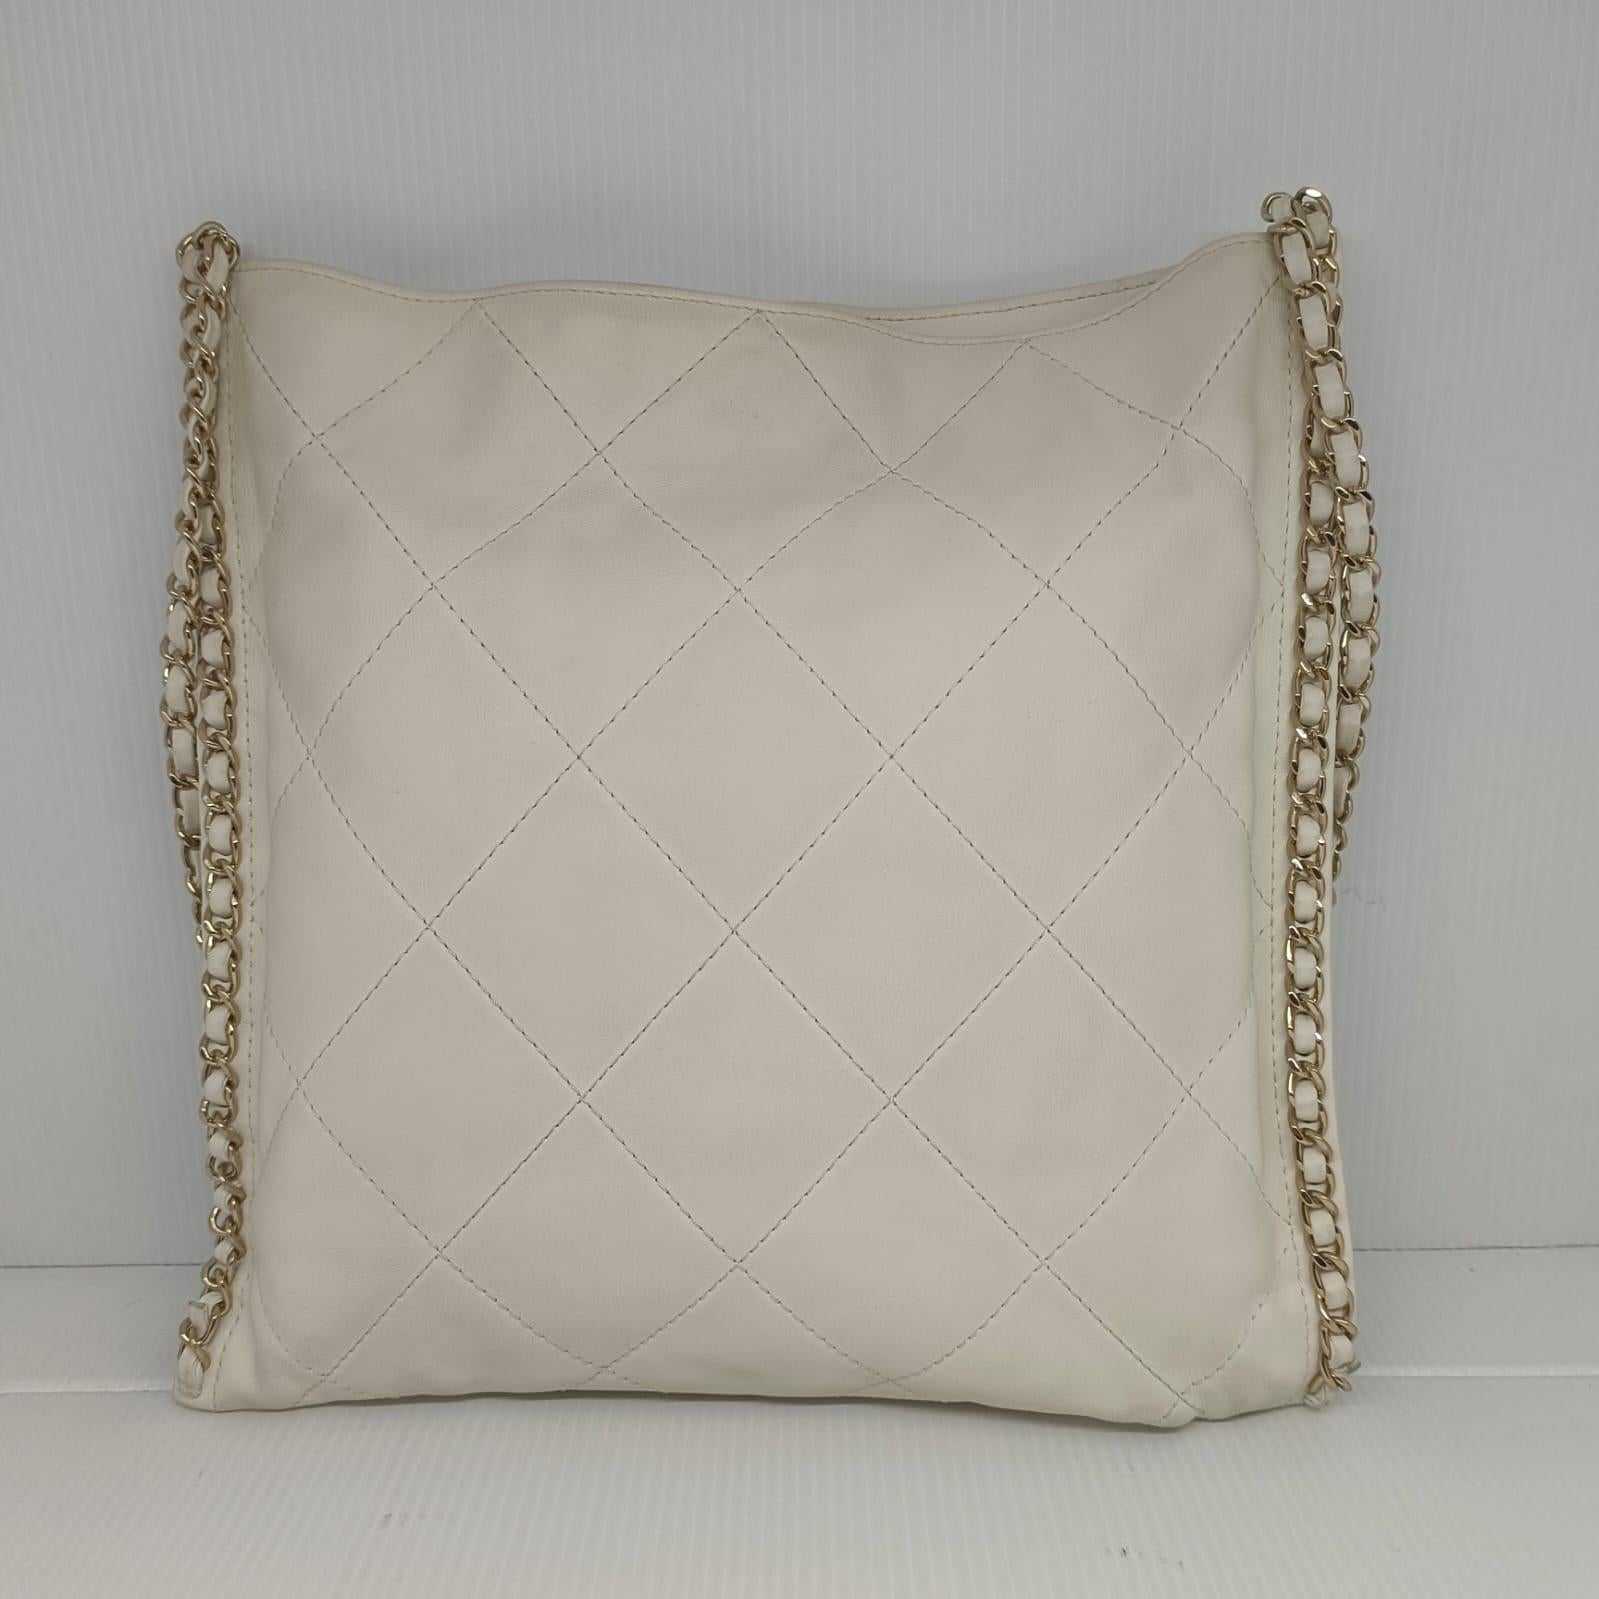 2022 Chanel White Calfskin Quilted Chain Trimmed Flat Tote Bag For Sale 5